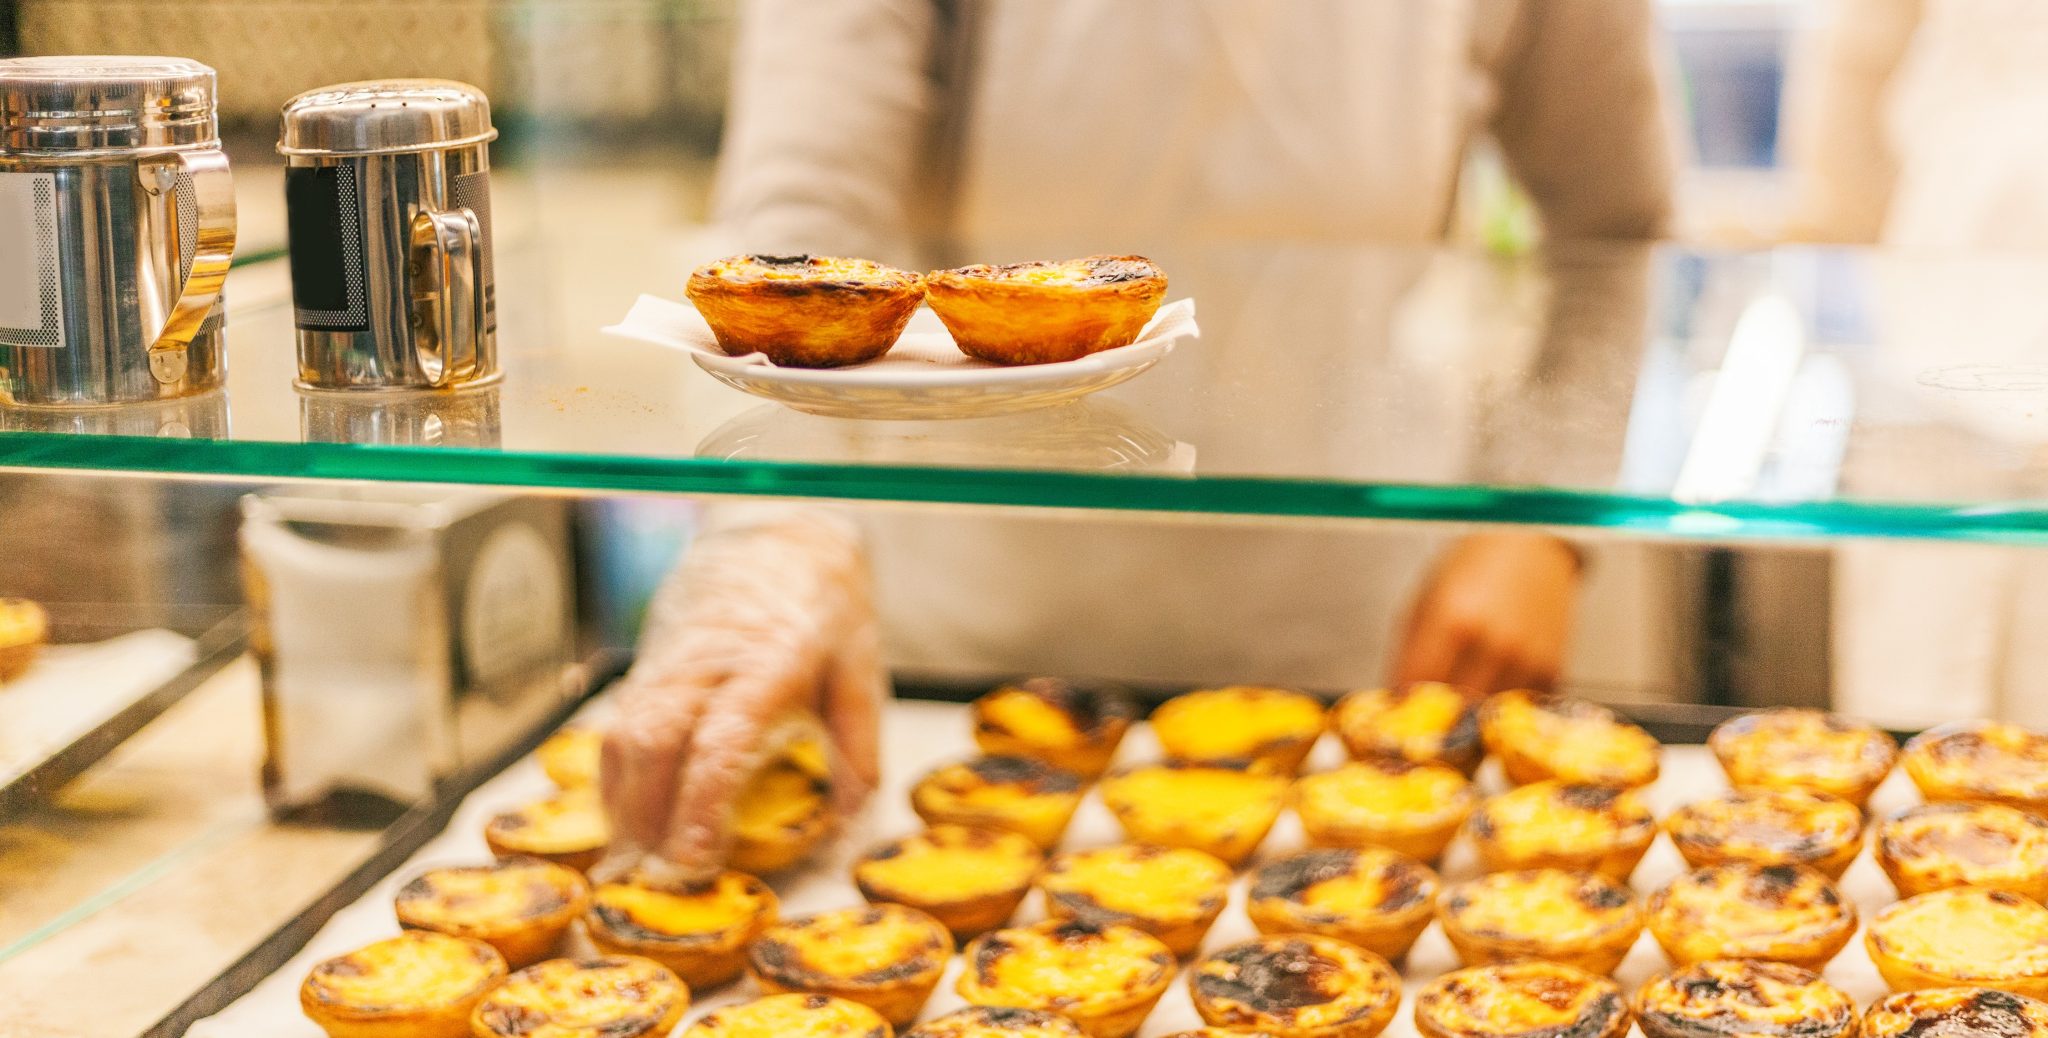 Where to Find the Best Pastéis de Nata in Lisbon, Portugal